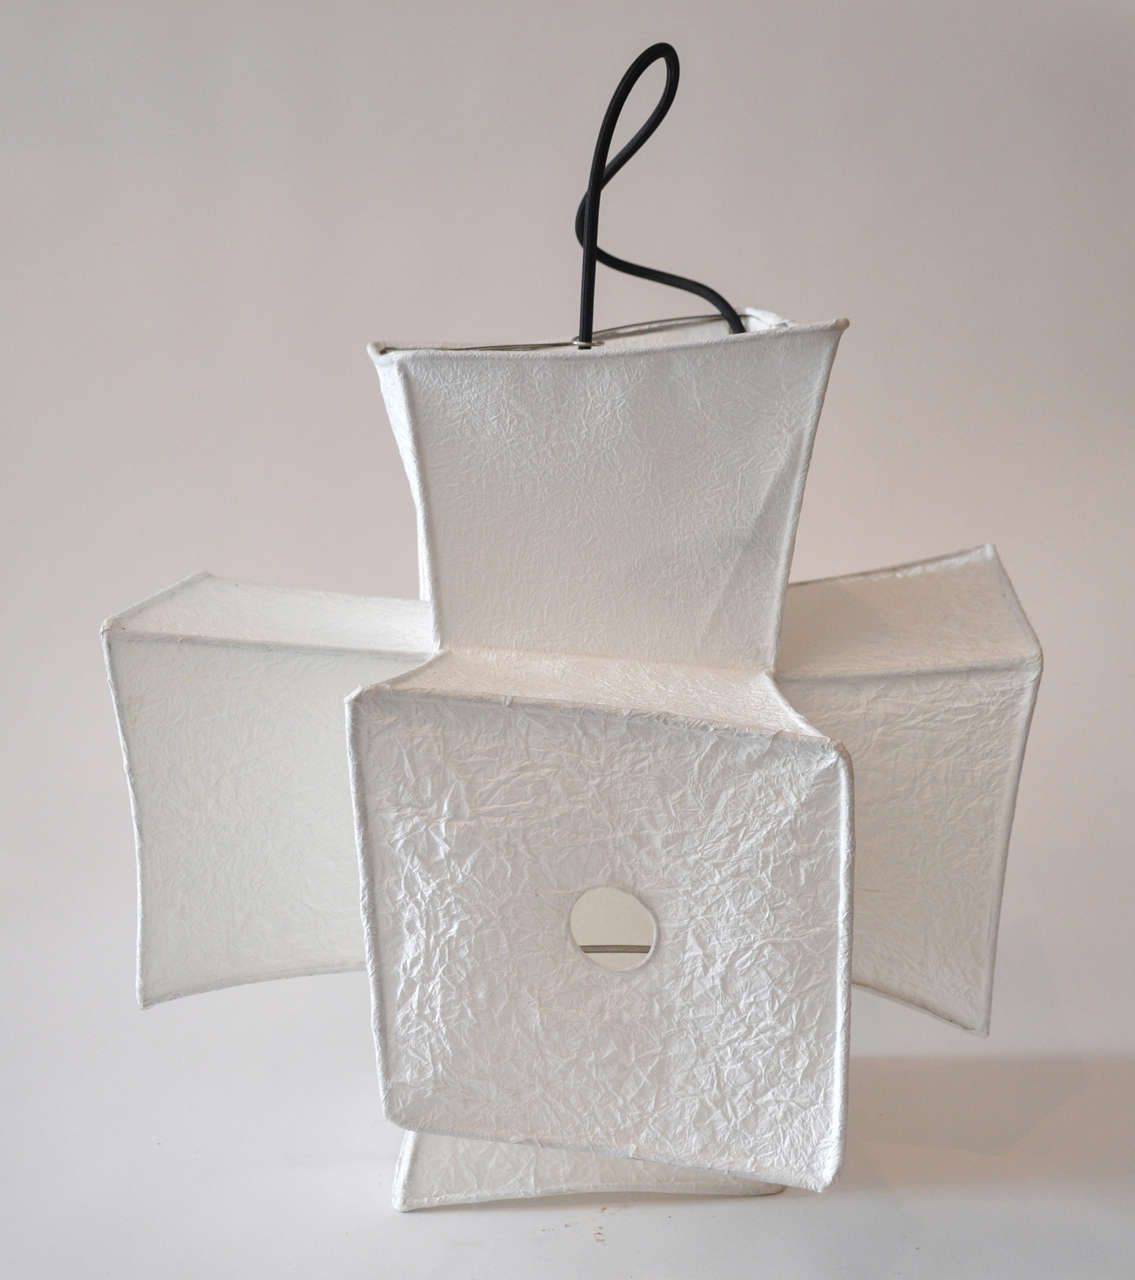 Light Fixture and Paper Lantern by Andrew Stansell 2